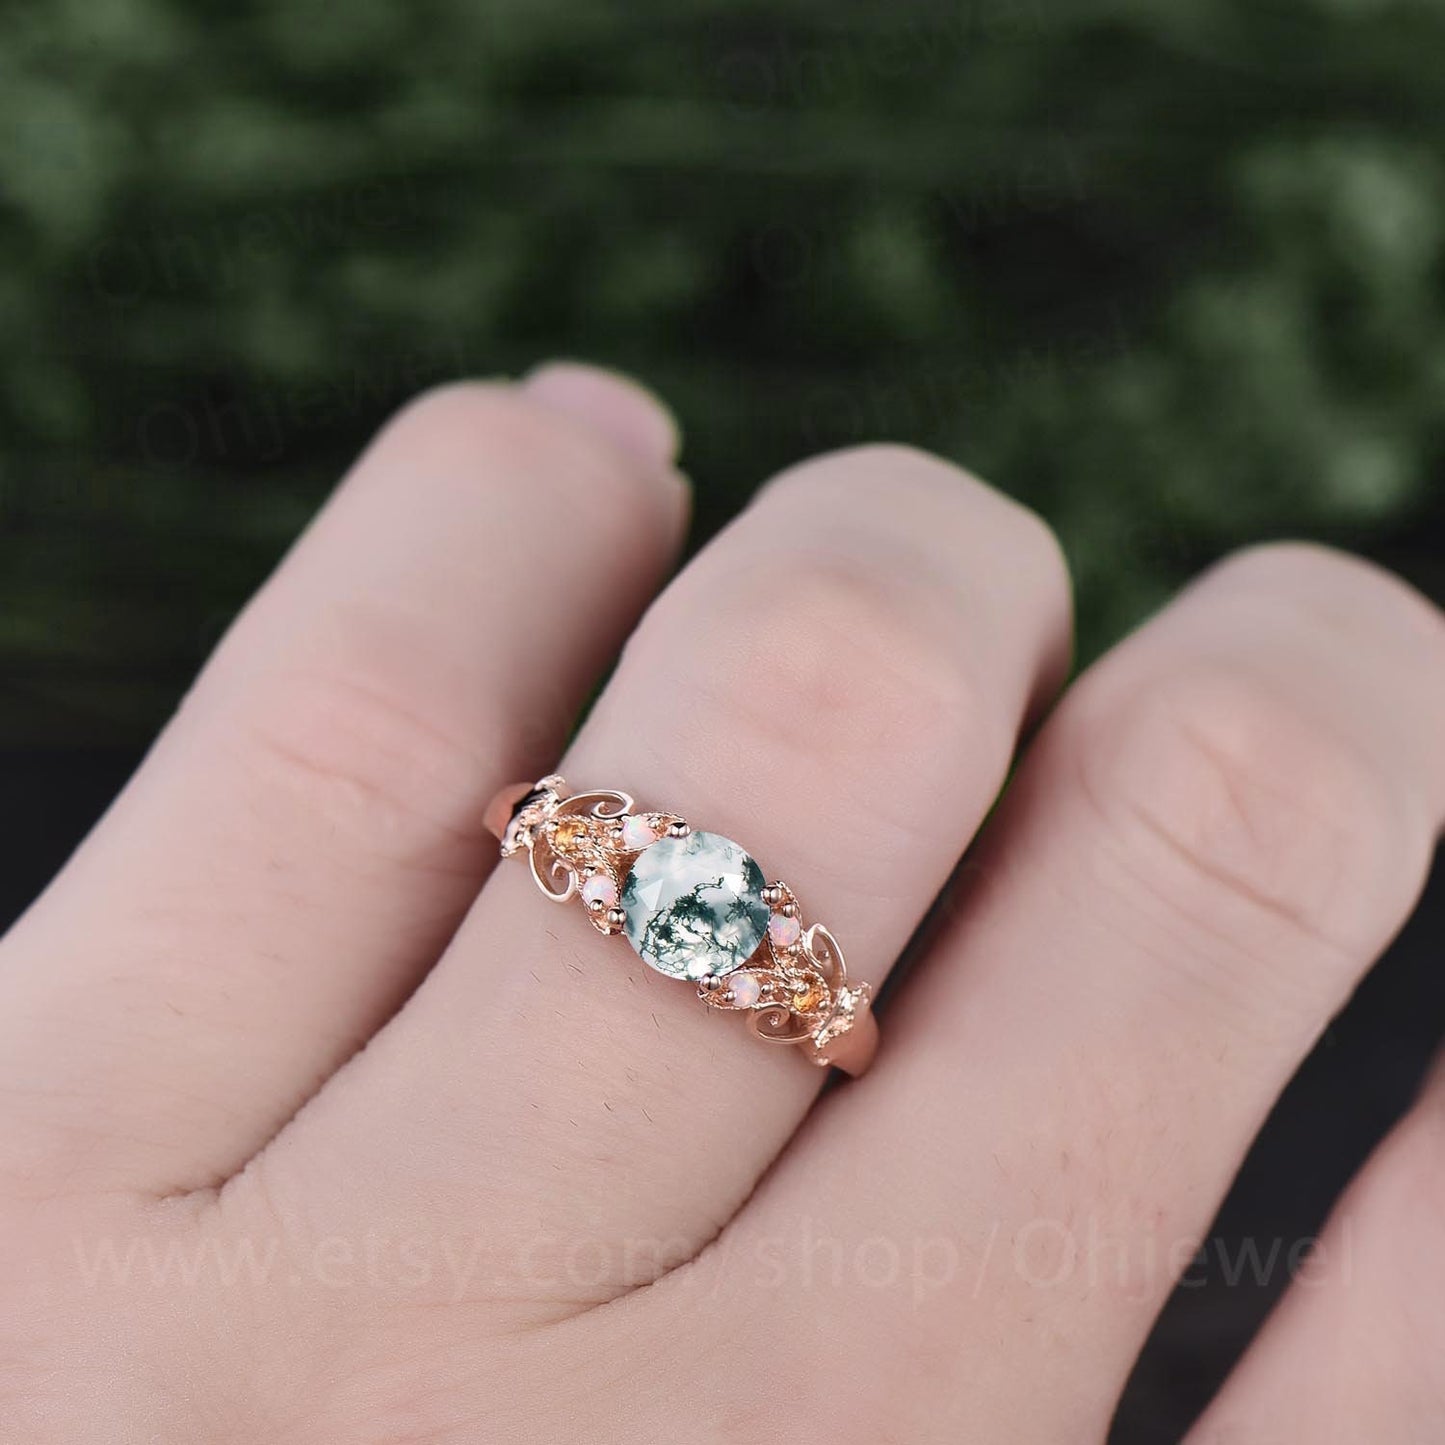 Unique round green moss agate engagement ring art deco vintage opal ring citrine ring milgrain butterfly ring rose gold silver wedding ring